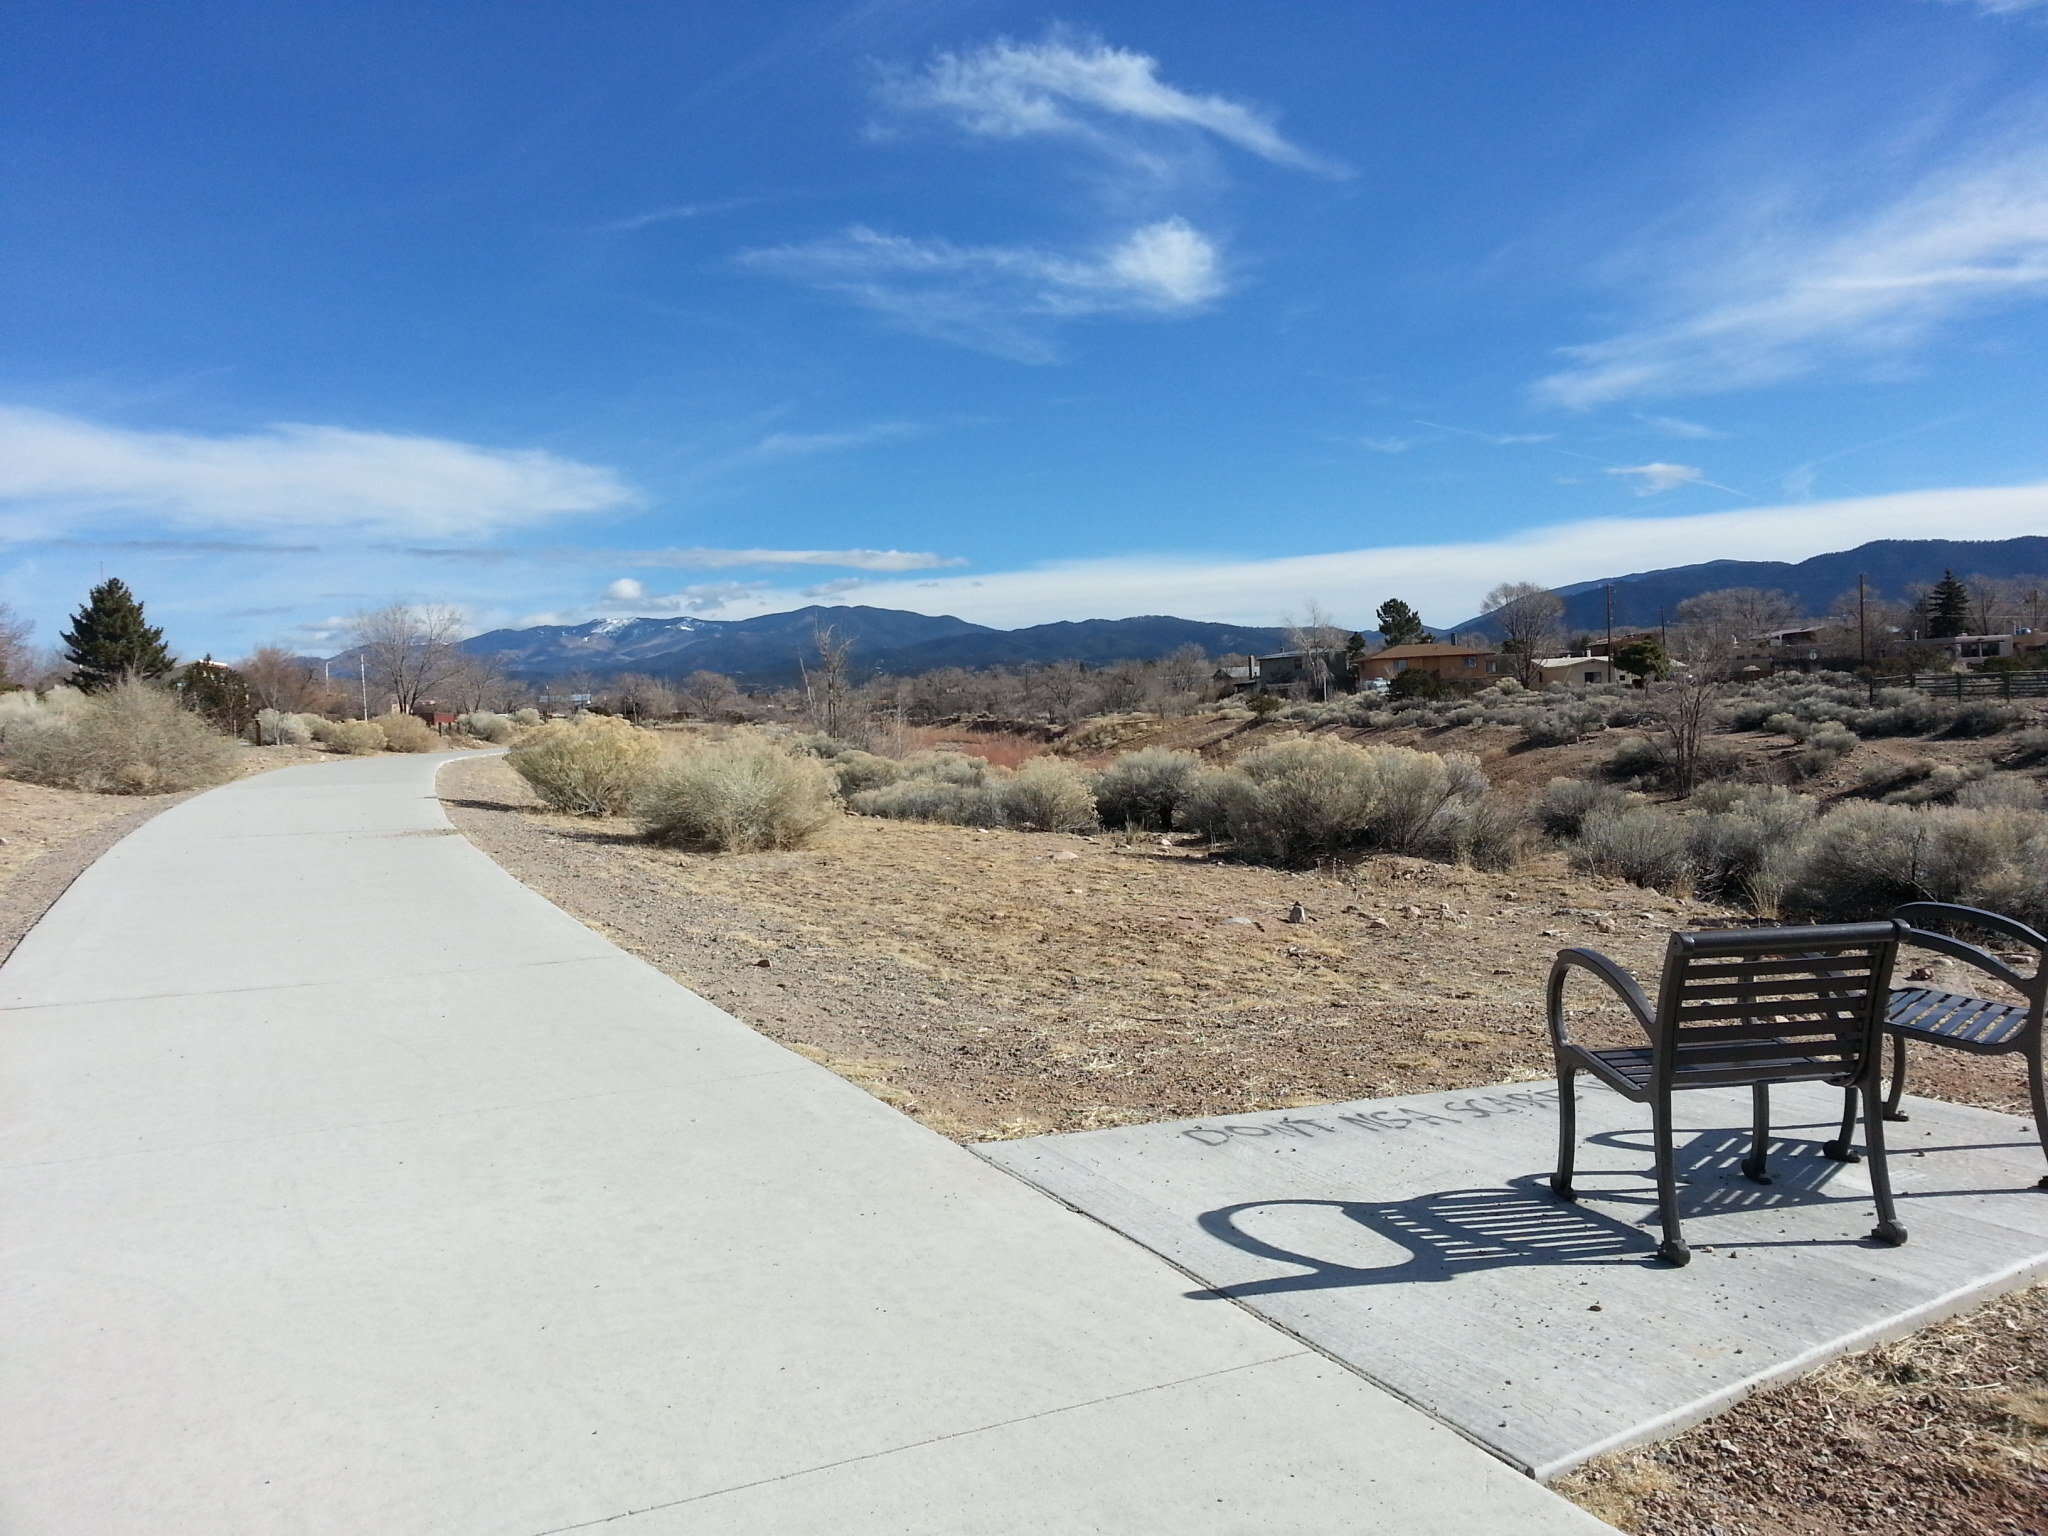 A rest stop along the path at Frenchy's Field Park in Santa Fe, NM